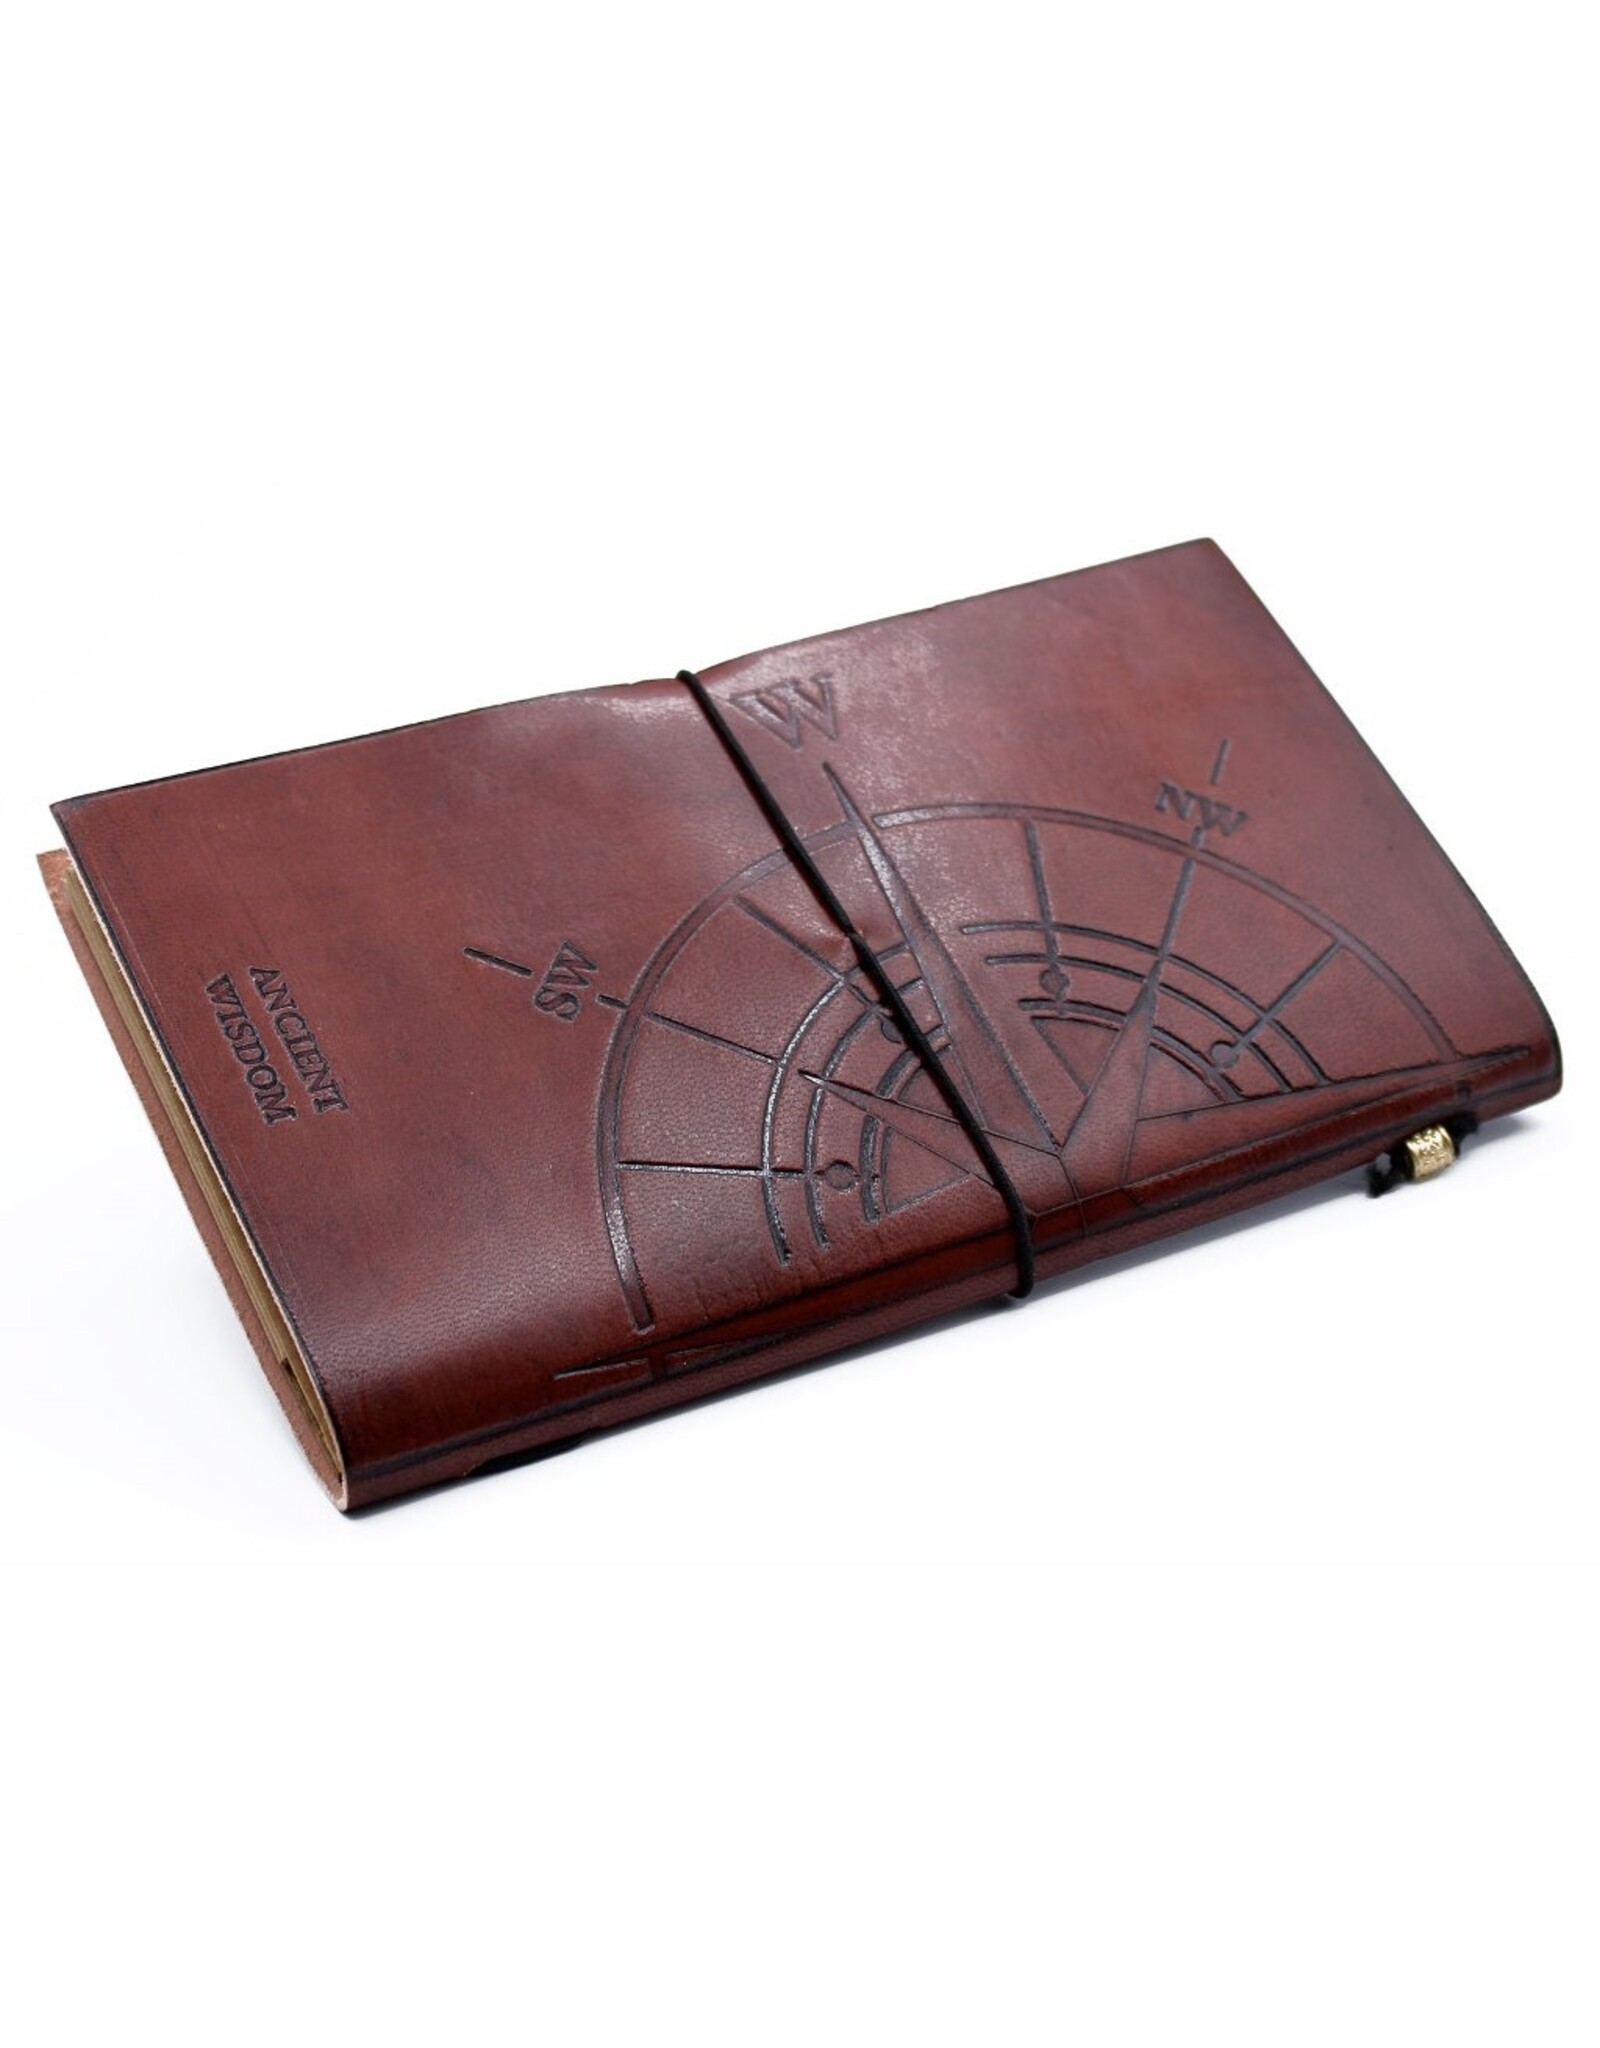 AWG Miscellaneous - Leather Journal 'Travel the World'  22x12cm opy